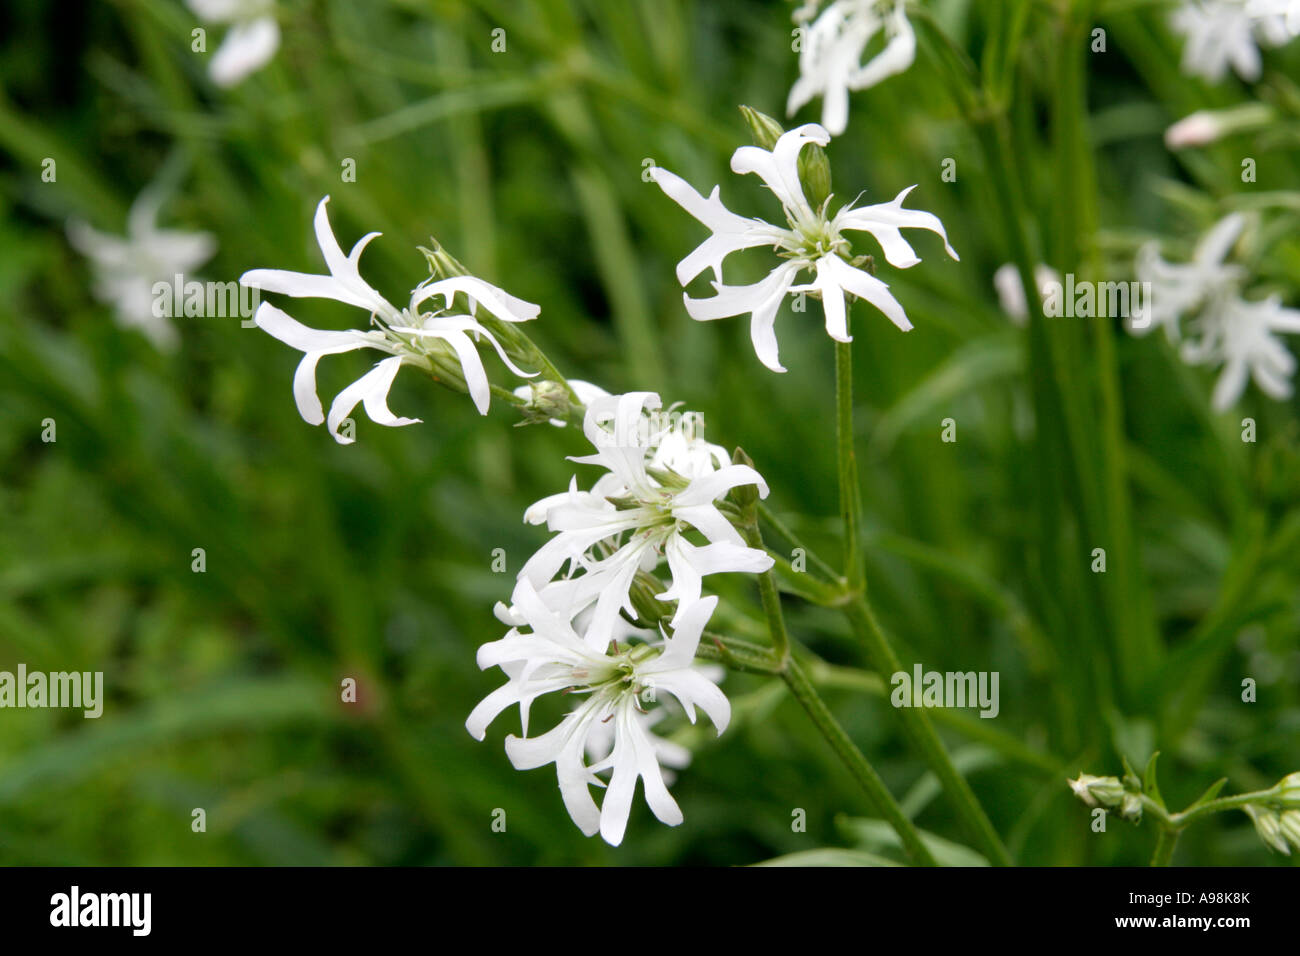 Lychnis flos cuculi alba white form of Ragged Robin a british native wild plant which grows in damp meadows Photo - Alamy